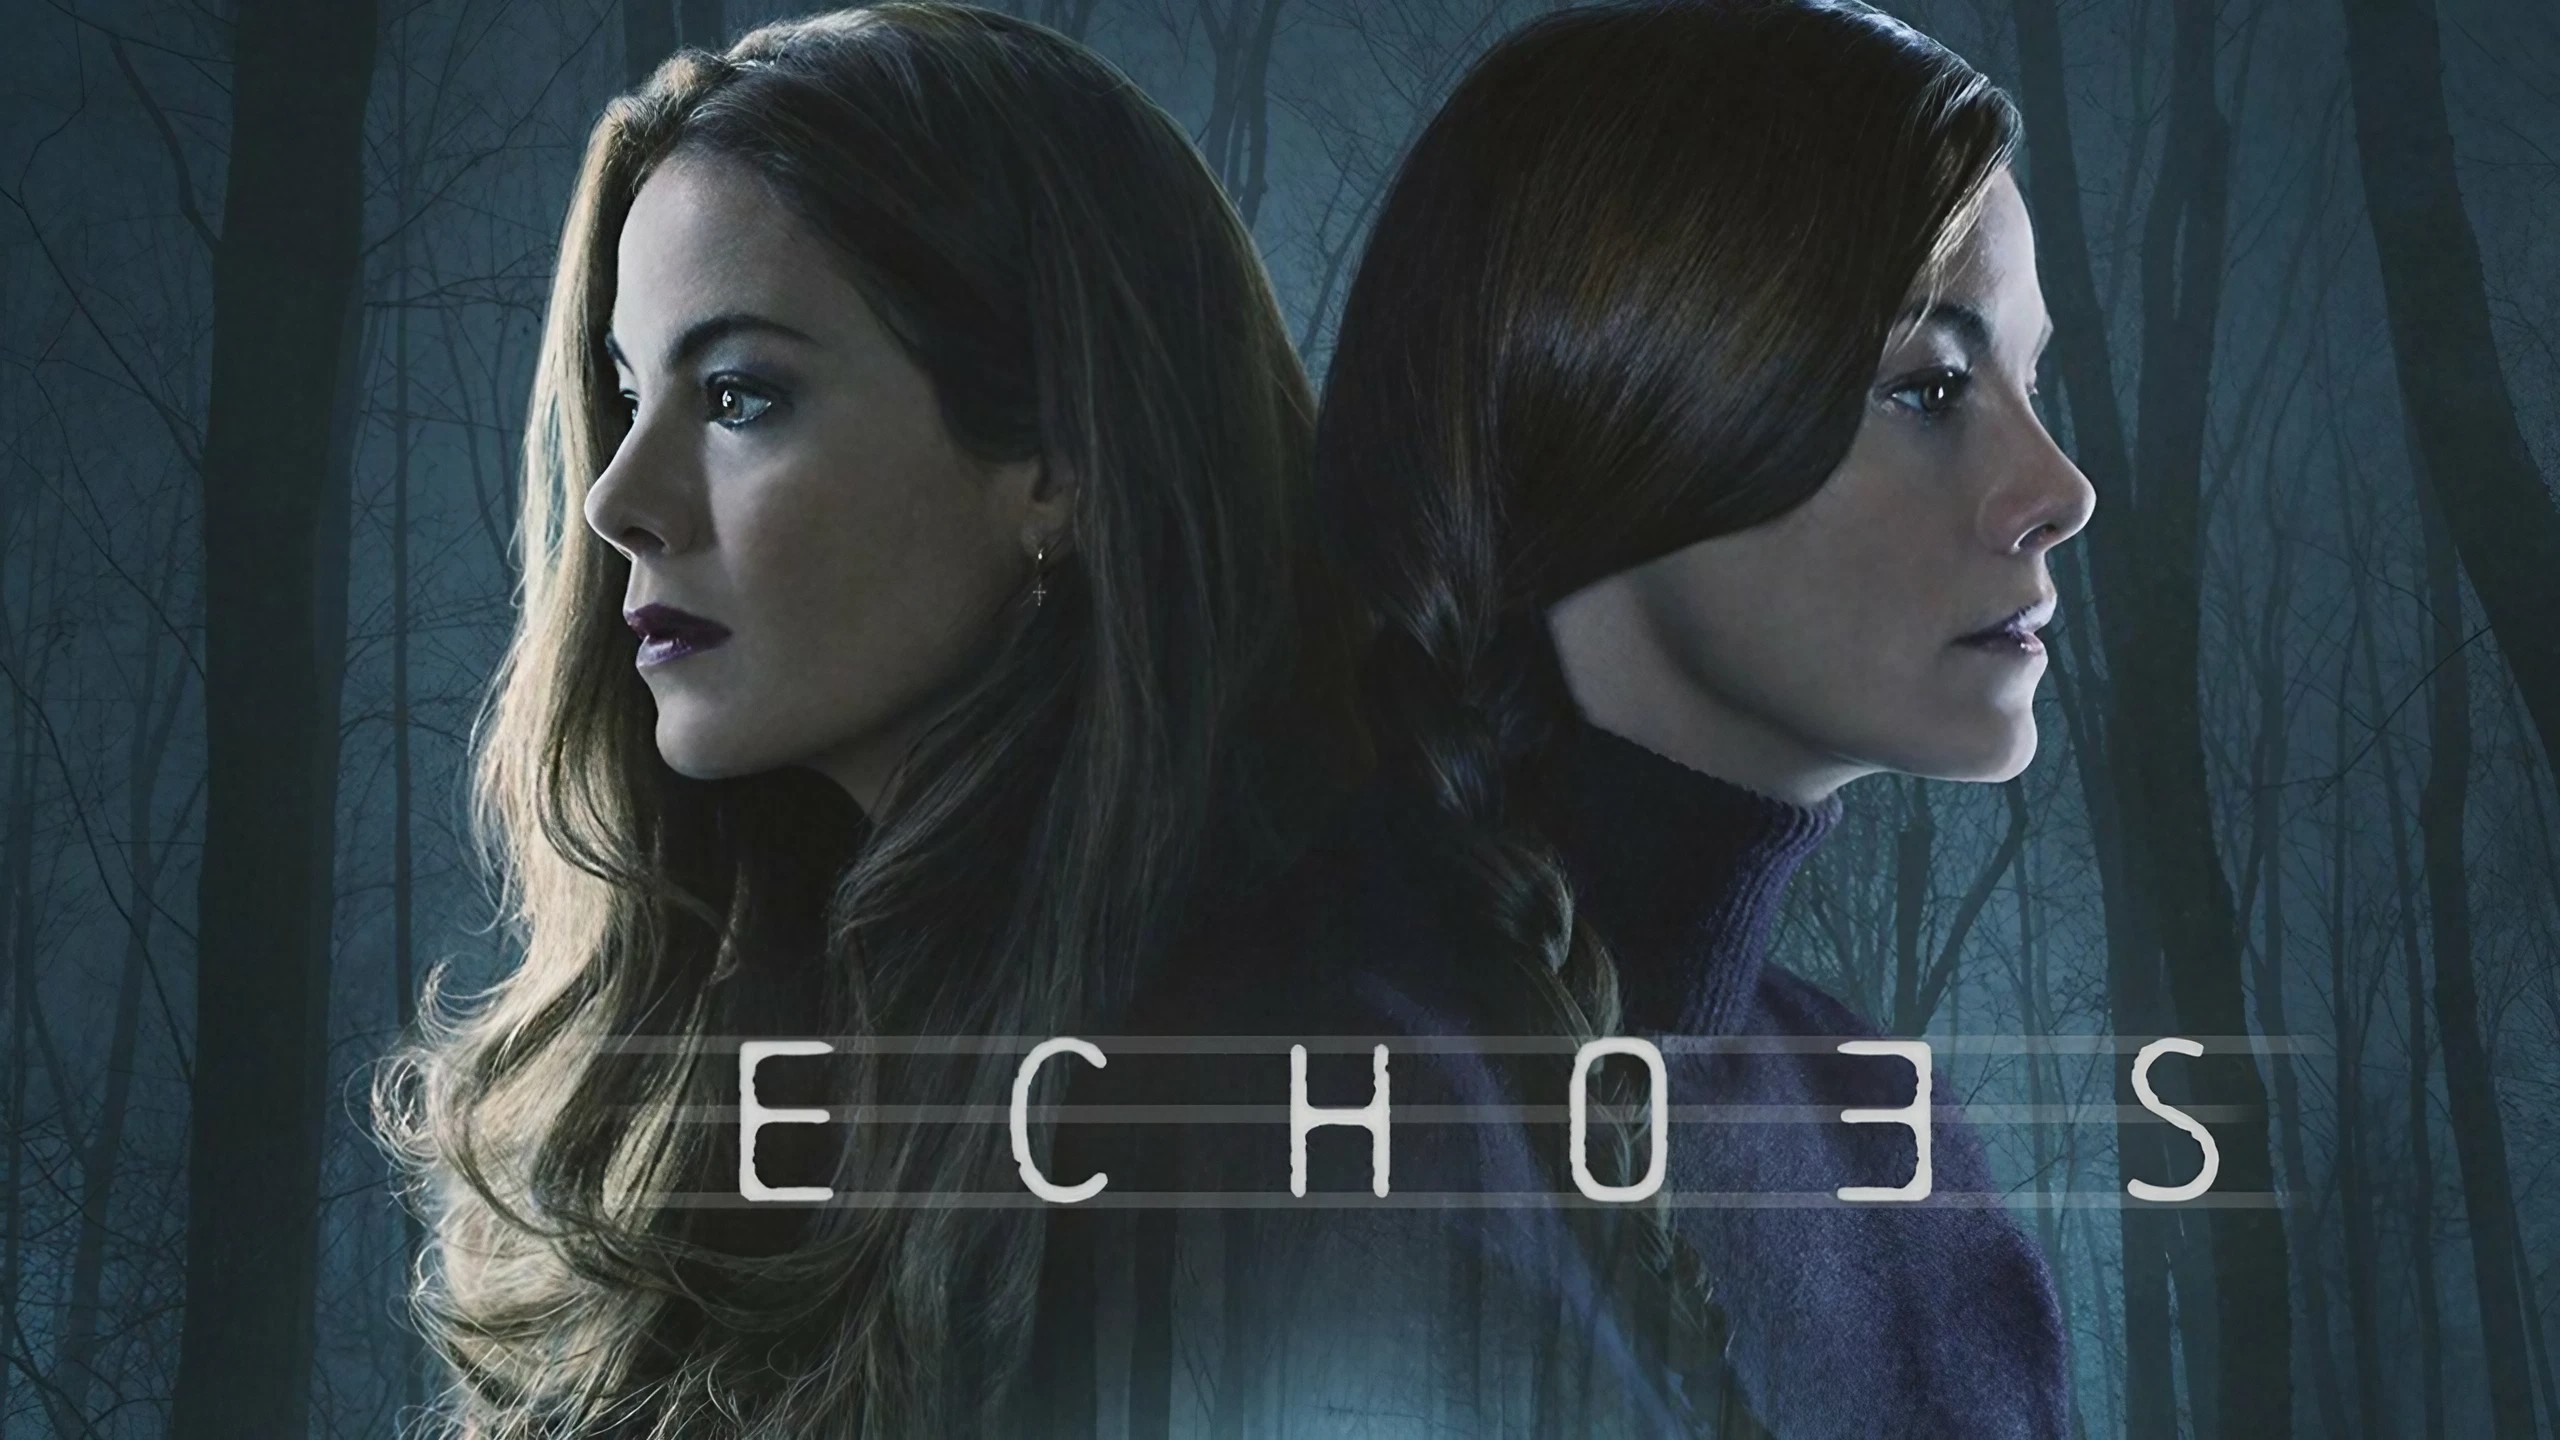 Is Netflix Series Echoes Based On A True Story